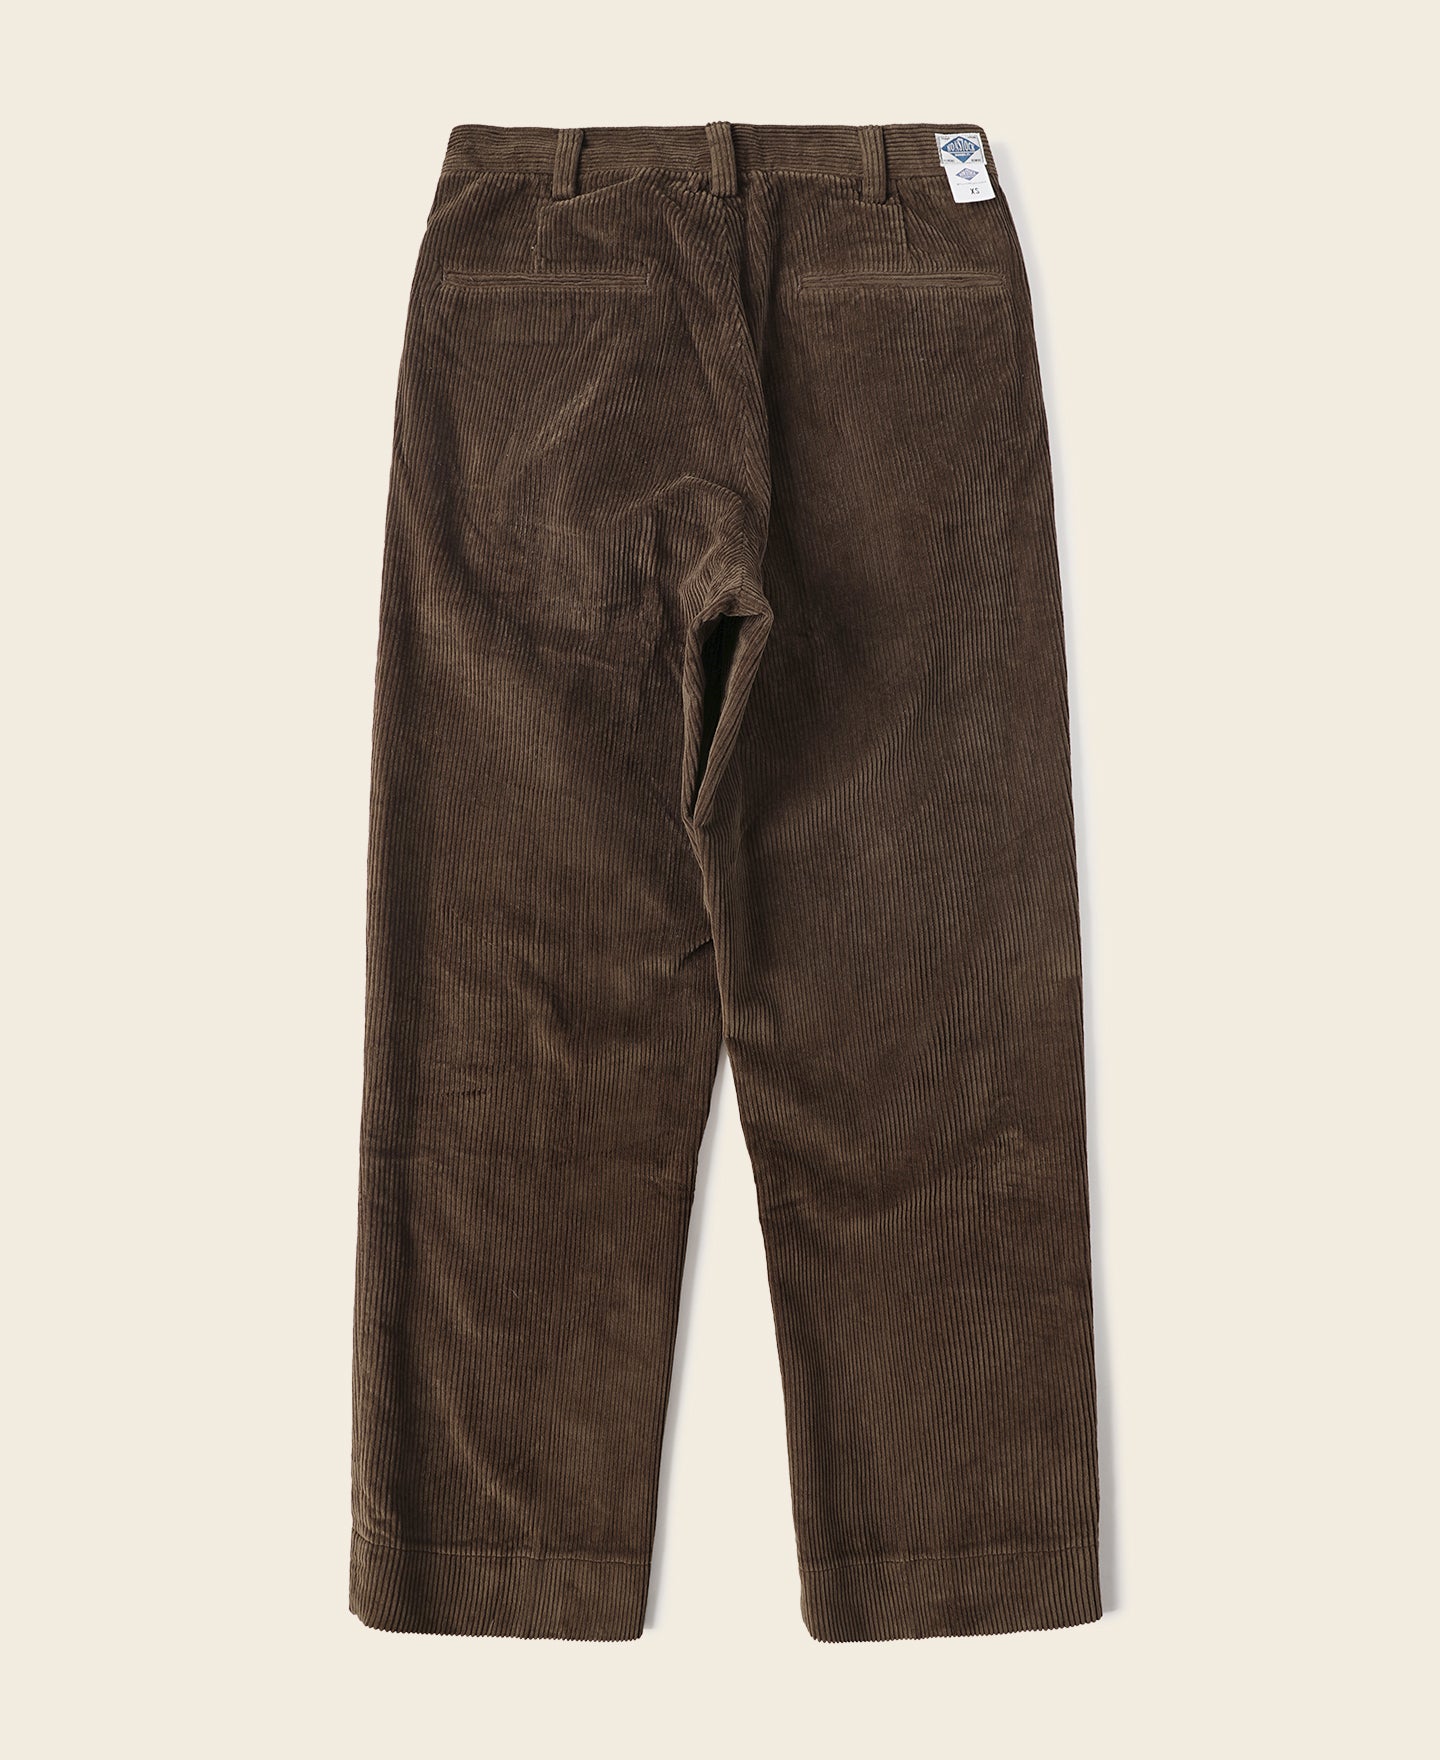 Brown Corduroy Trousers, Men's Country Clothing